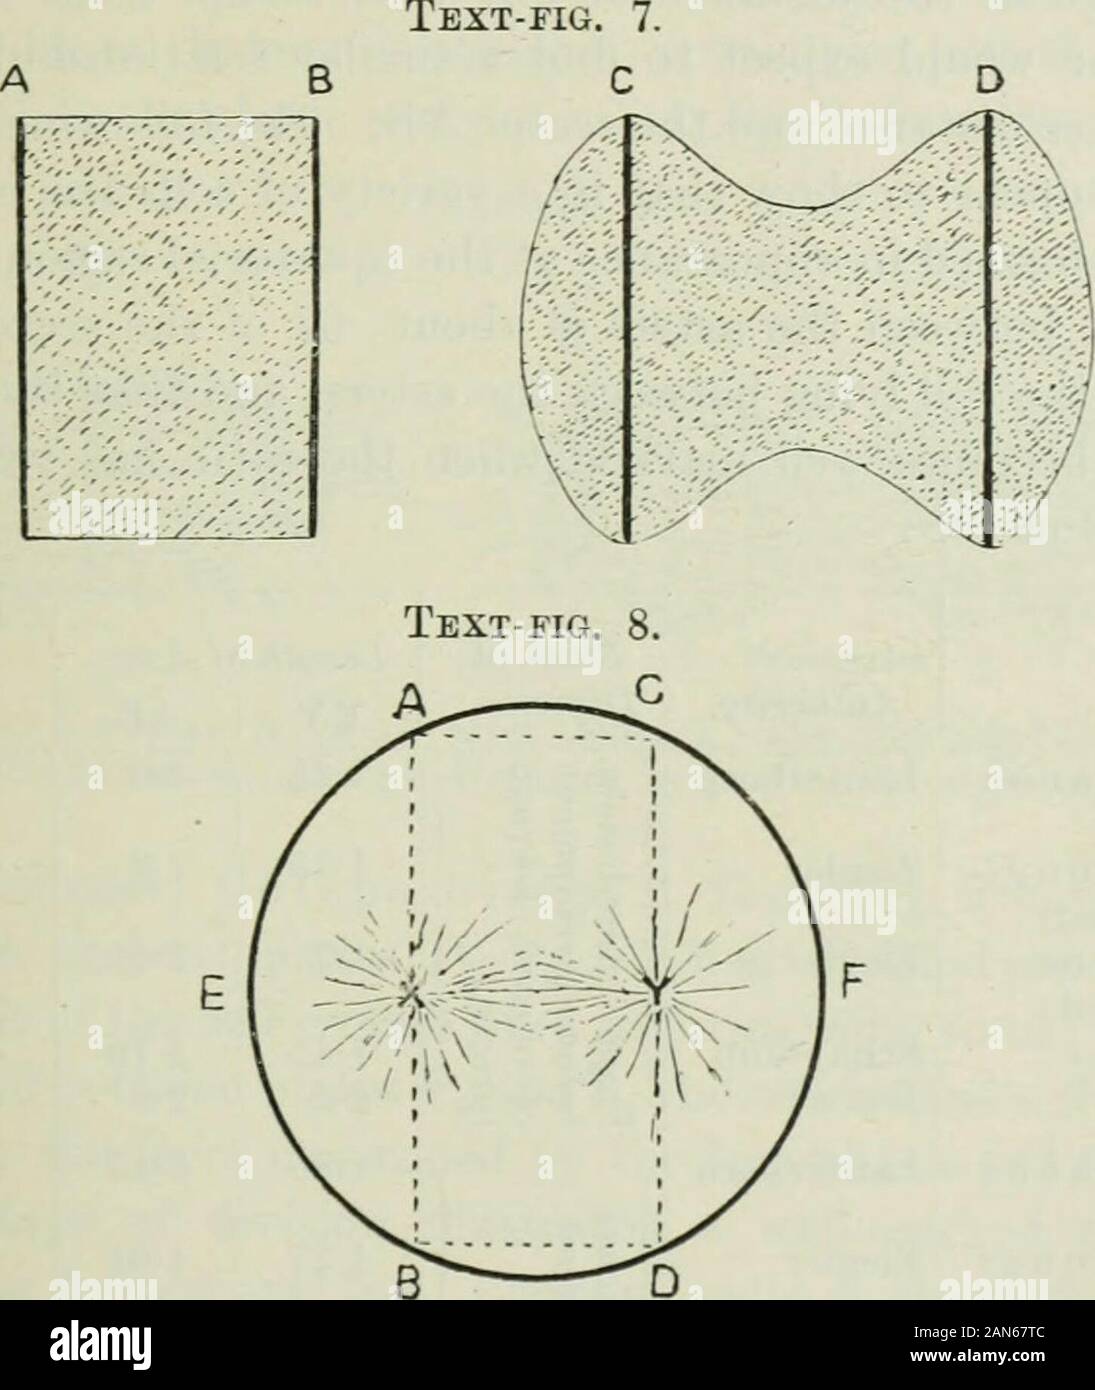 Quarterly journal of microscopical science . nce of a surface layer (Traubemembrane) which is automatically formed when protoplasmcomes into contact with water, and that the blastomeres failto fuse with each other just as oil-drops fail to fuse togetherif they are shaken in smaller drops in the presence of a soapor any similar substance which can form a condensation layerat the surface of the oil. The conclusion reached is that division of the cell is broughtabout by the elongation of one axis of the cell, and that thecleavage furrow results as an equilibrium between this processand the normal Stock Photo